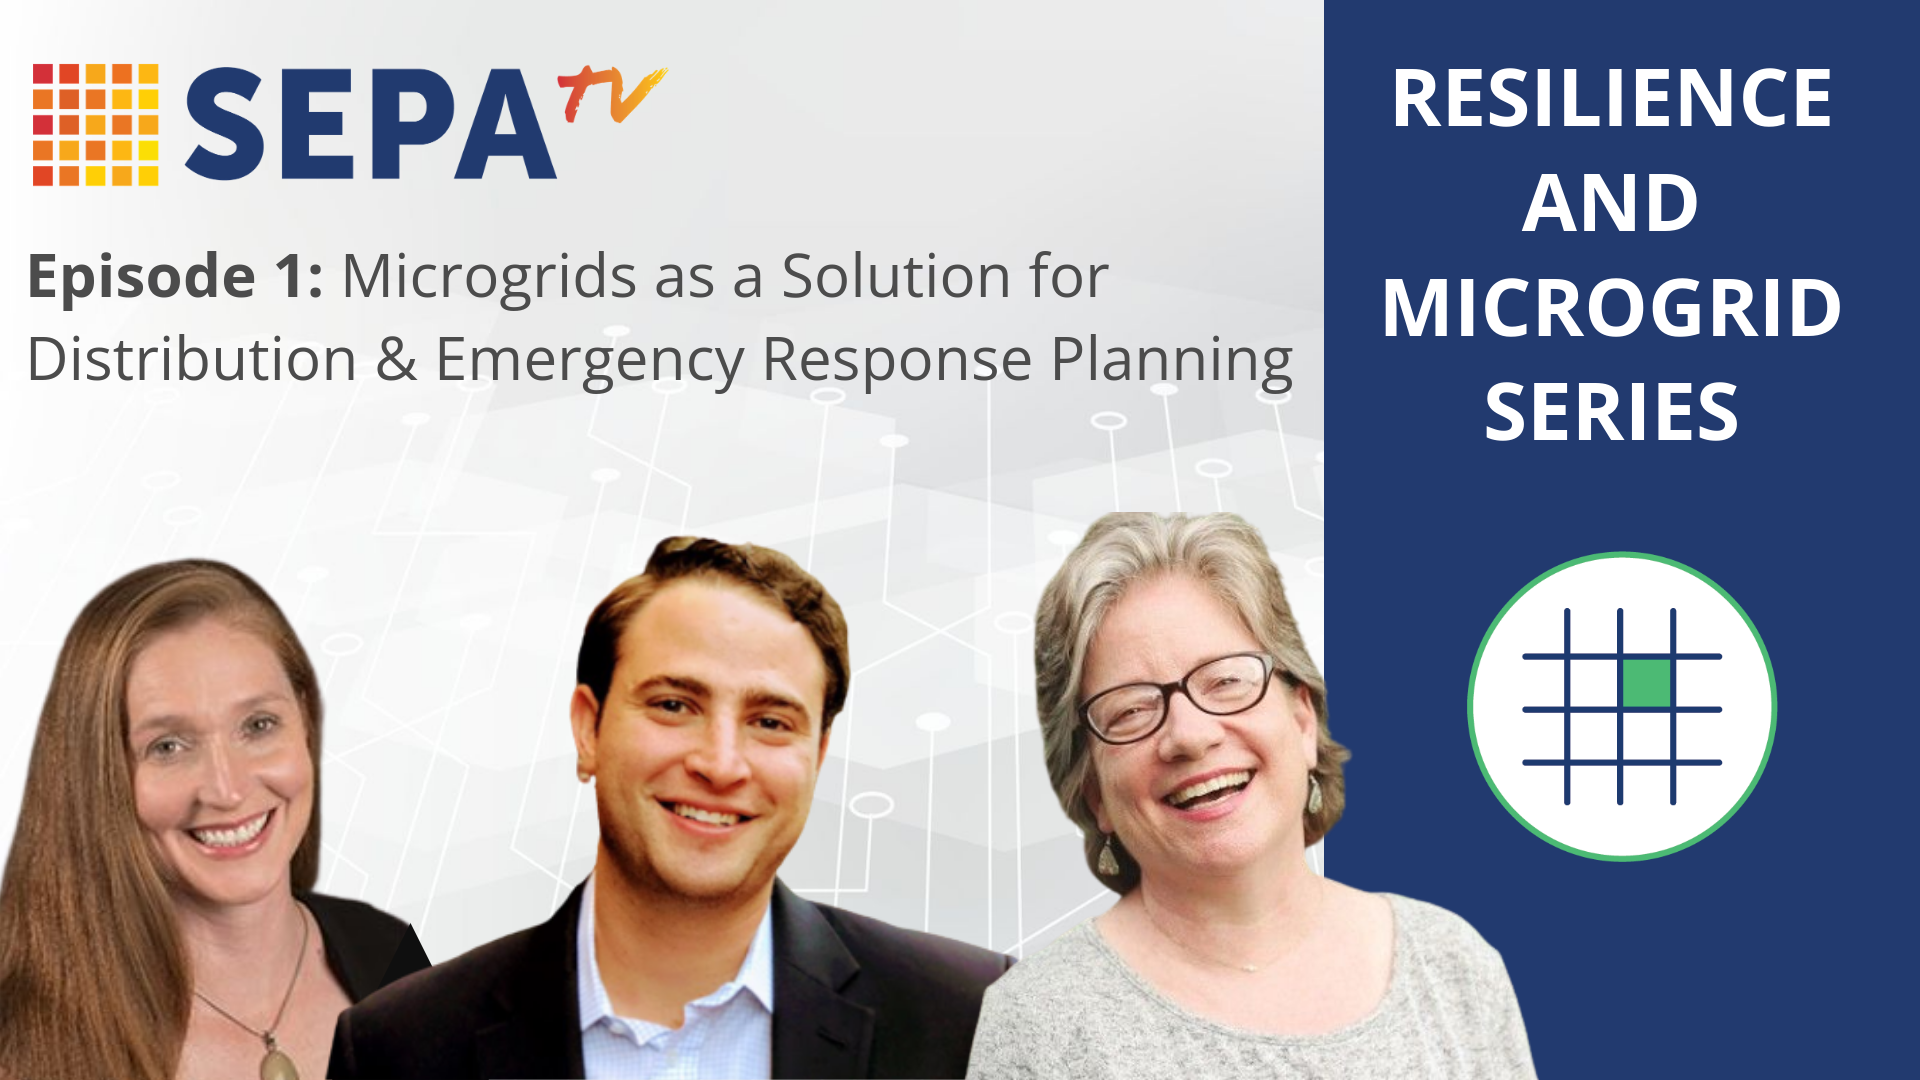 Microgrids as a Solution for Distribution & Emergency Response Planning